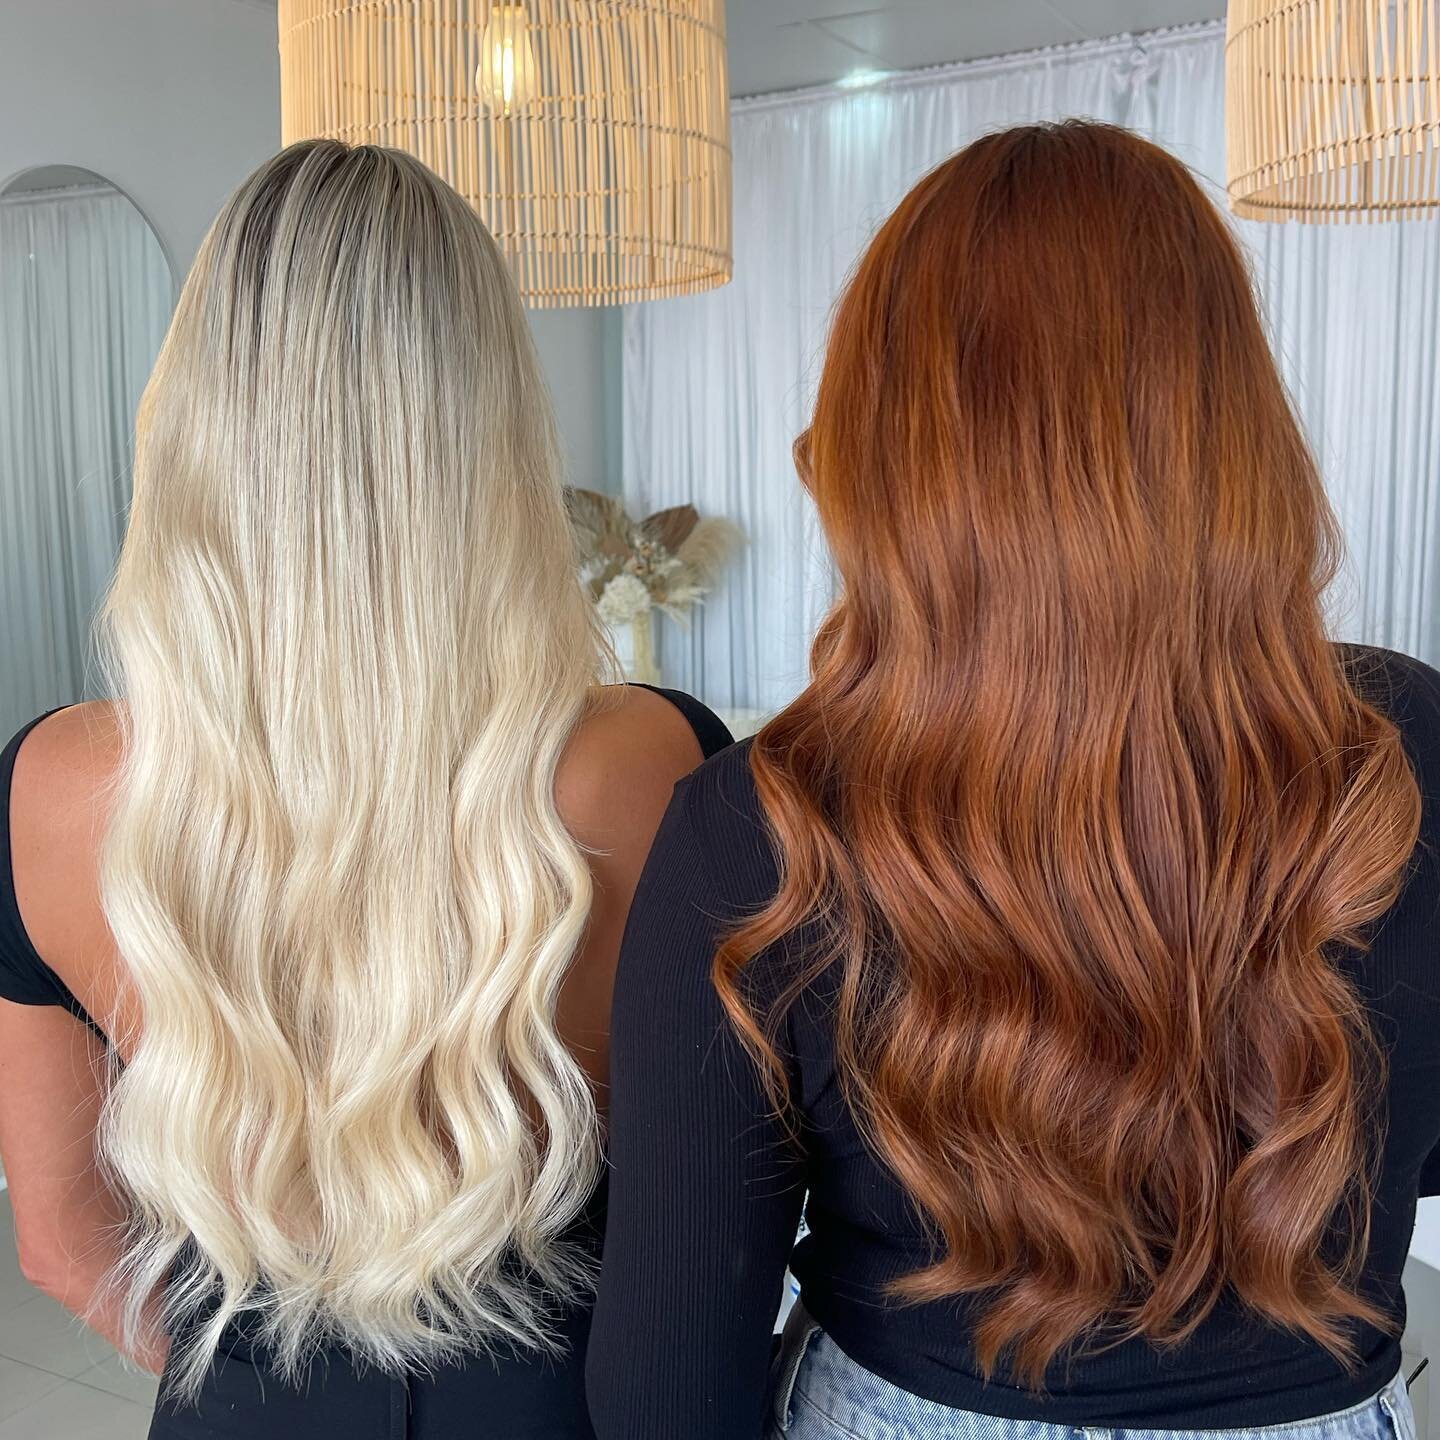 Besties that slay together, stay together👯&zwj;♀️

Want to book a side by side hair day with your bestie? DM to find out how or book online via the link in our bio 💌🌷✨

Model 1: @nataliagaunt__ 
Hair by: @kimberley_ladylox 

Model 2: @racheljepson